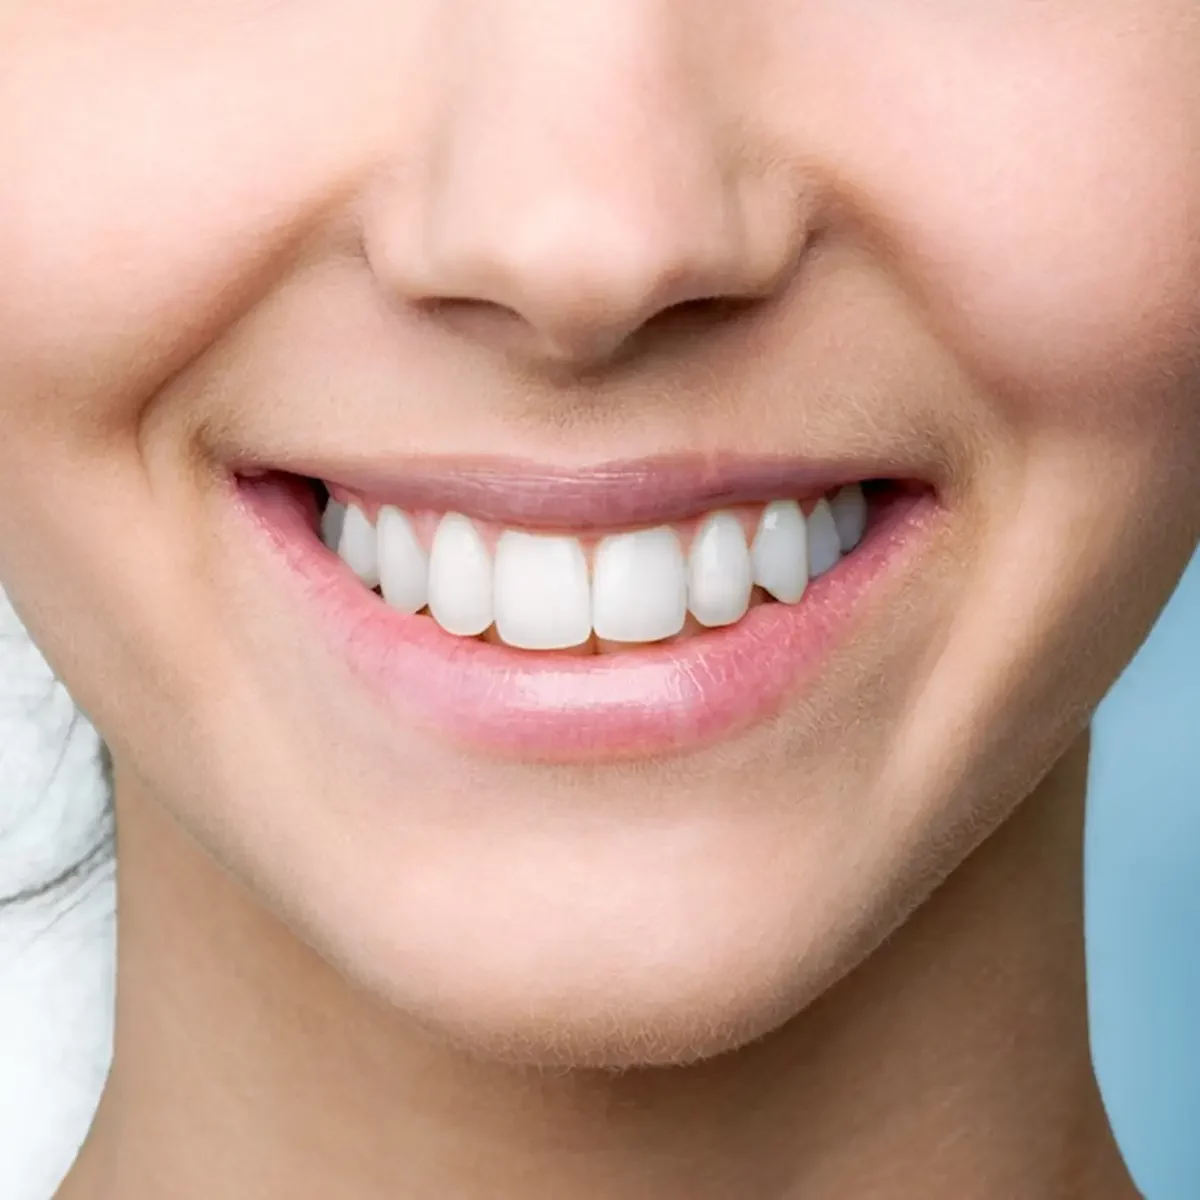 A woman with a bright smile showcasing her white teeth after undergoing teeth whitening treatment